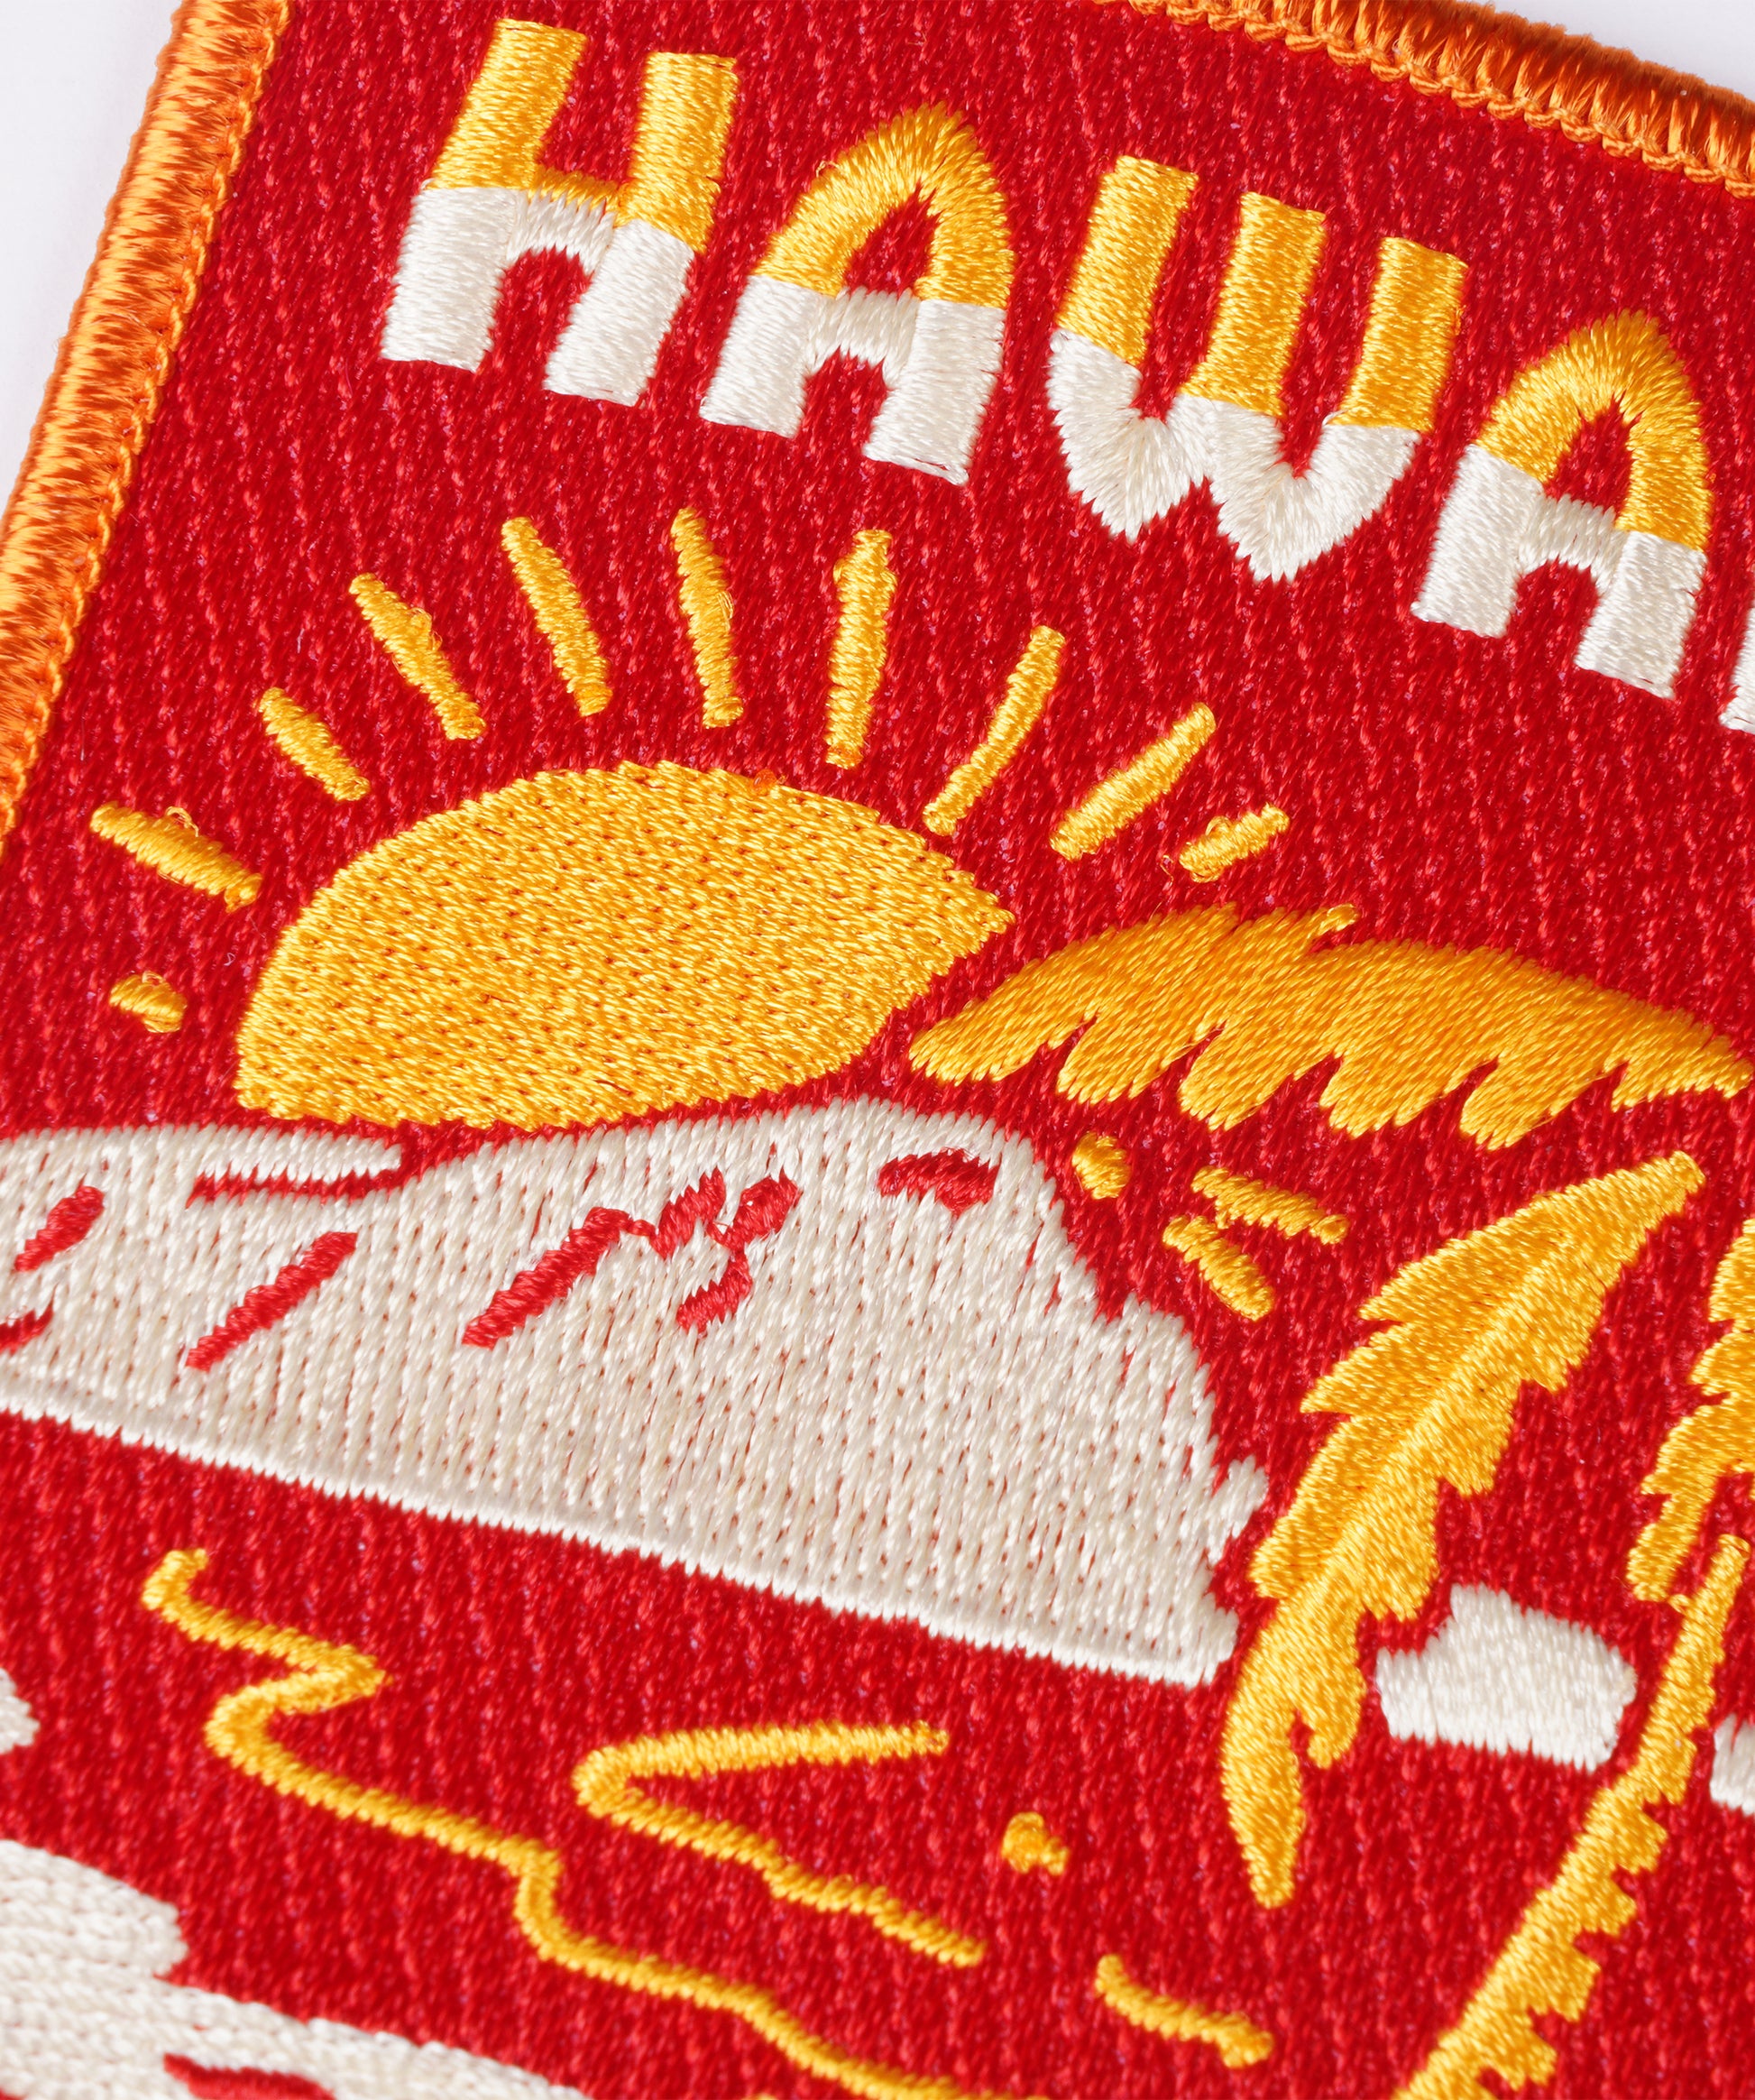 LOT OF 25!! Hawaii Patch 3.50 x 2.25, State of Hawaiian Embroidered Iron  On or Sew On Flag Patch Emblem